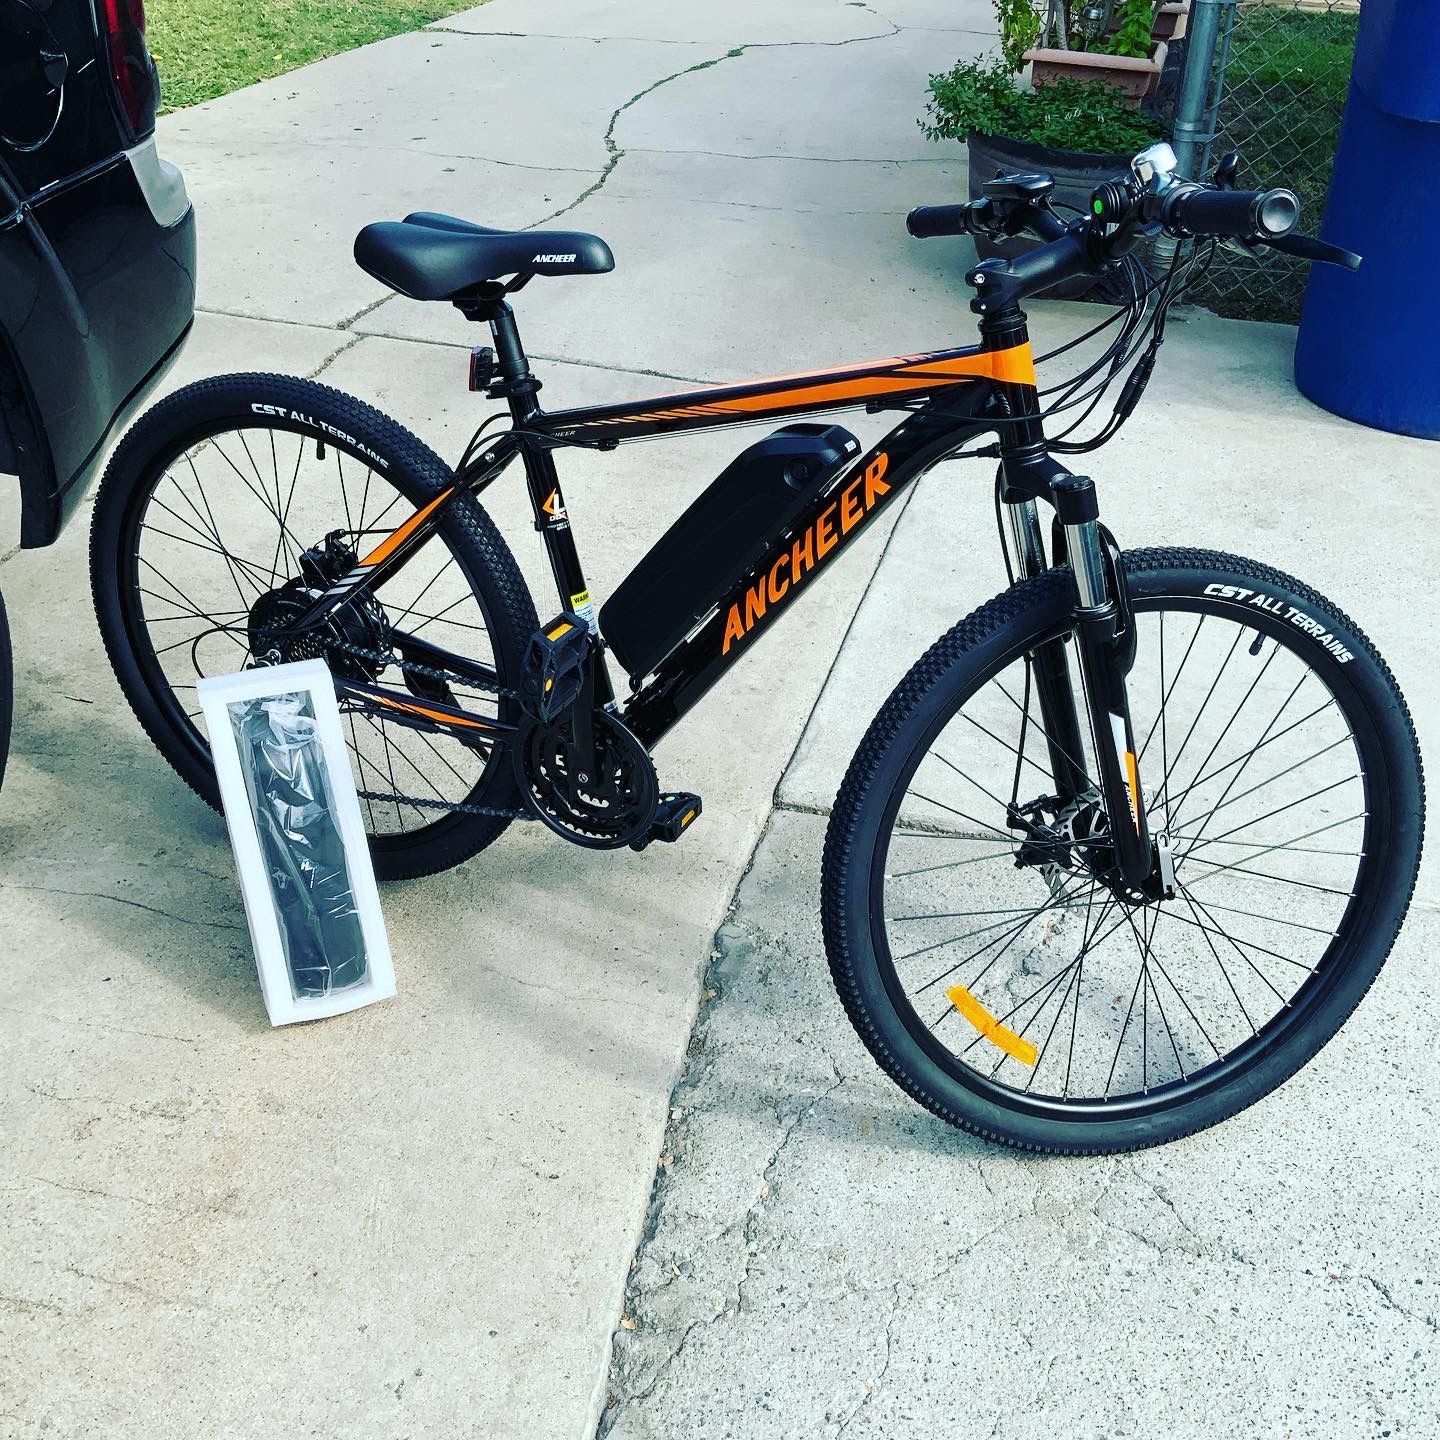 Ancheer Electric Bikes, Electric Bikes, Electric Scooters, Pocket Bikes, Gas Scooters, Mini Motorcycles, Go-Karts, Hover Board